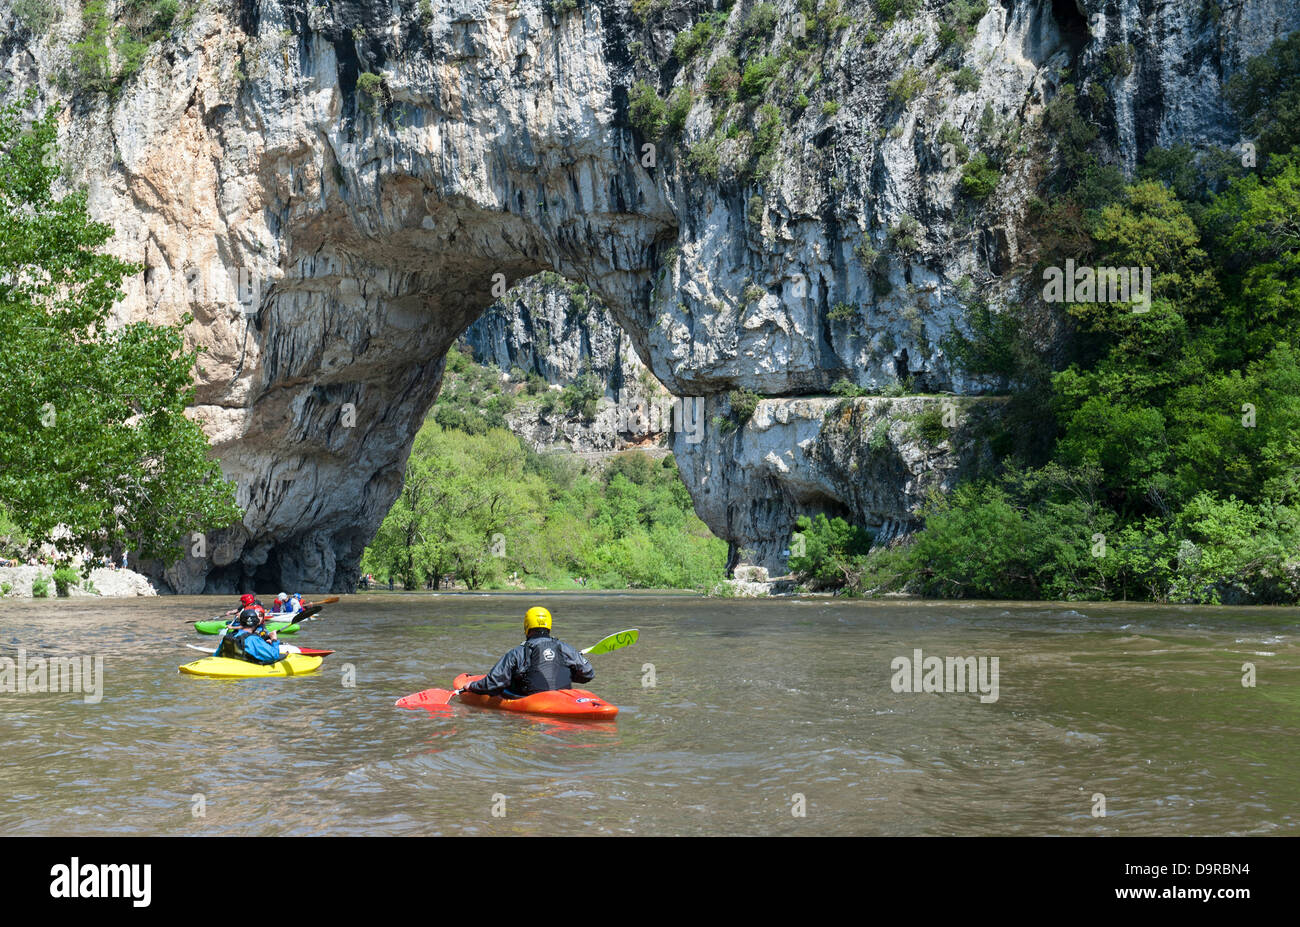 People canoeing on the Ardeche river in the canyon Gorges d'Ardèche near a natural rock bridge near Vallon-Pont-d'Arc, France Stock Photo